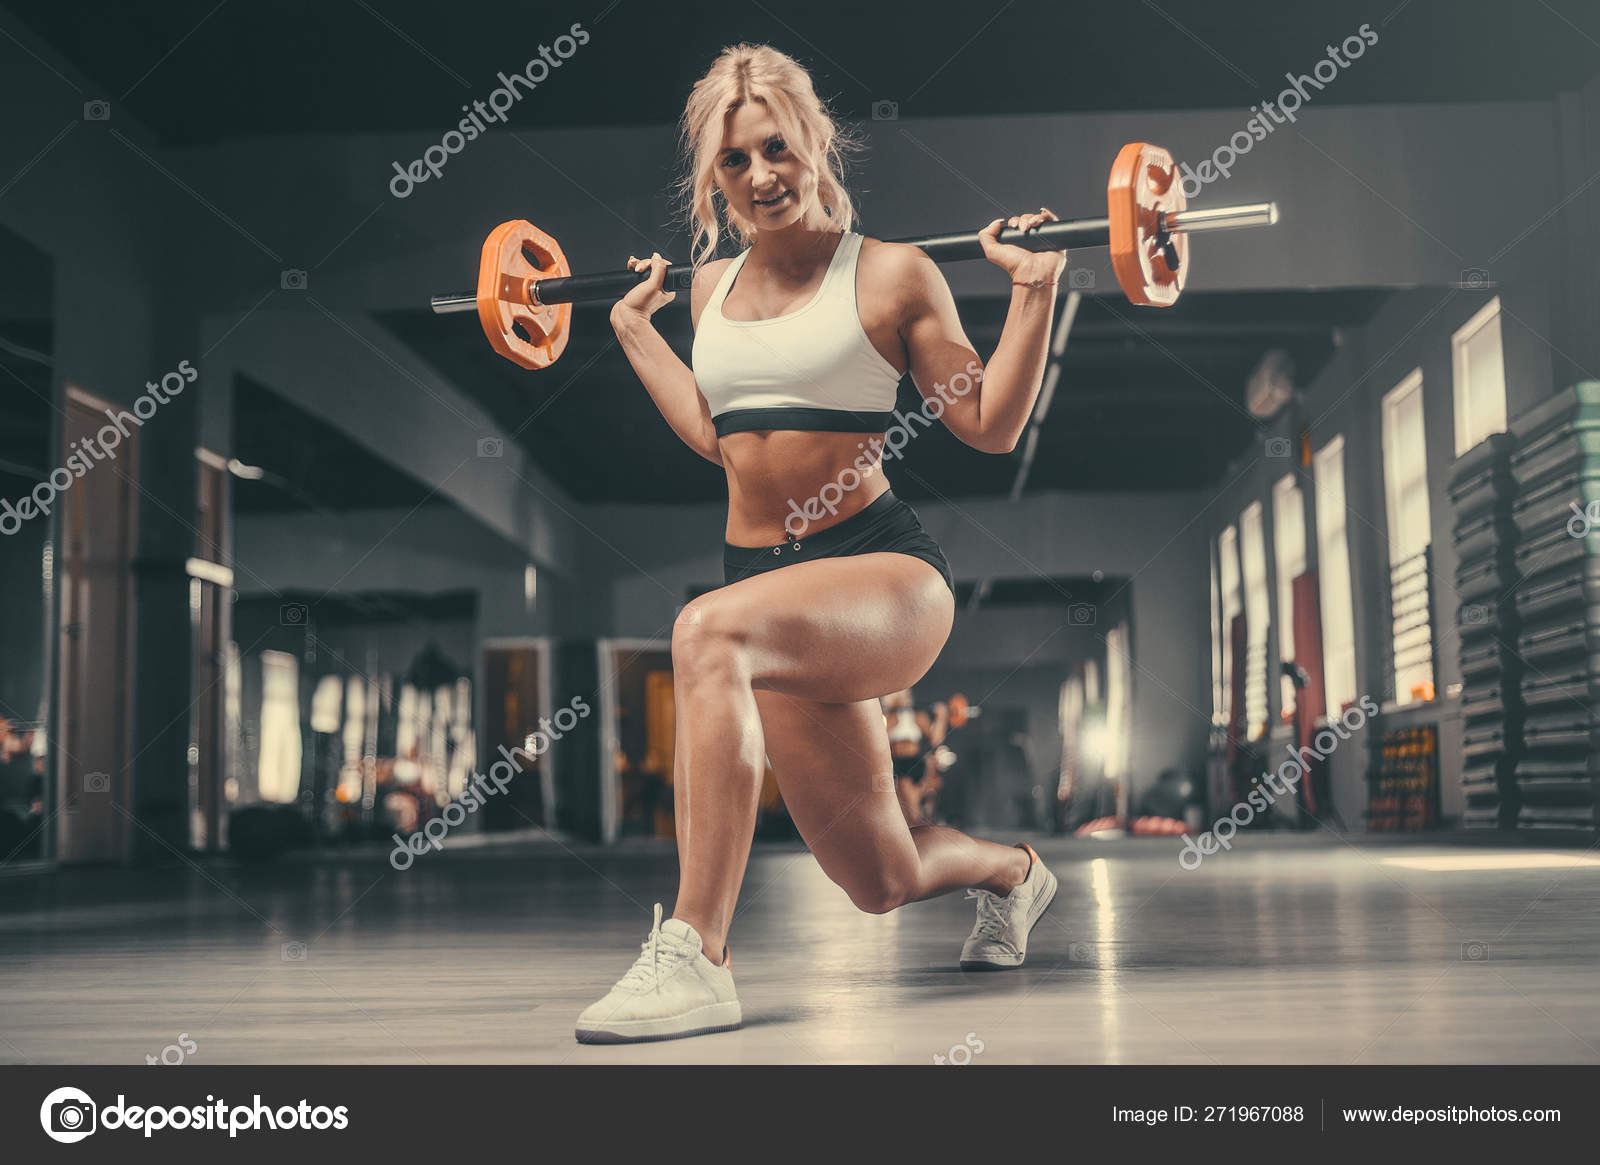 Fit healthy young woman with a strong body